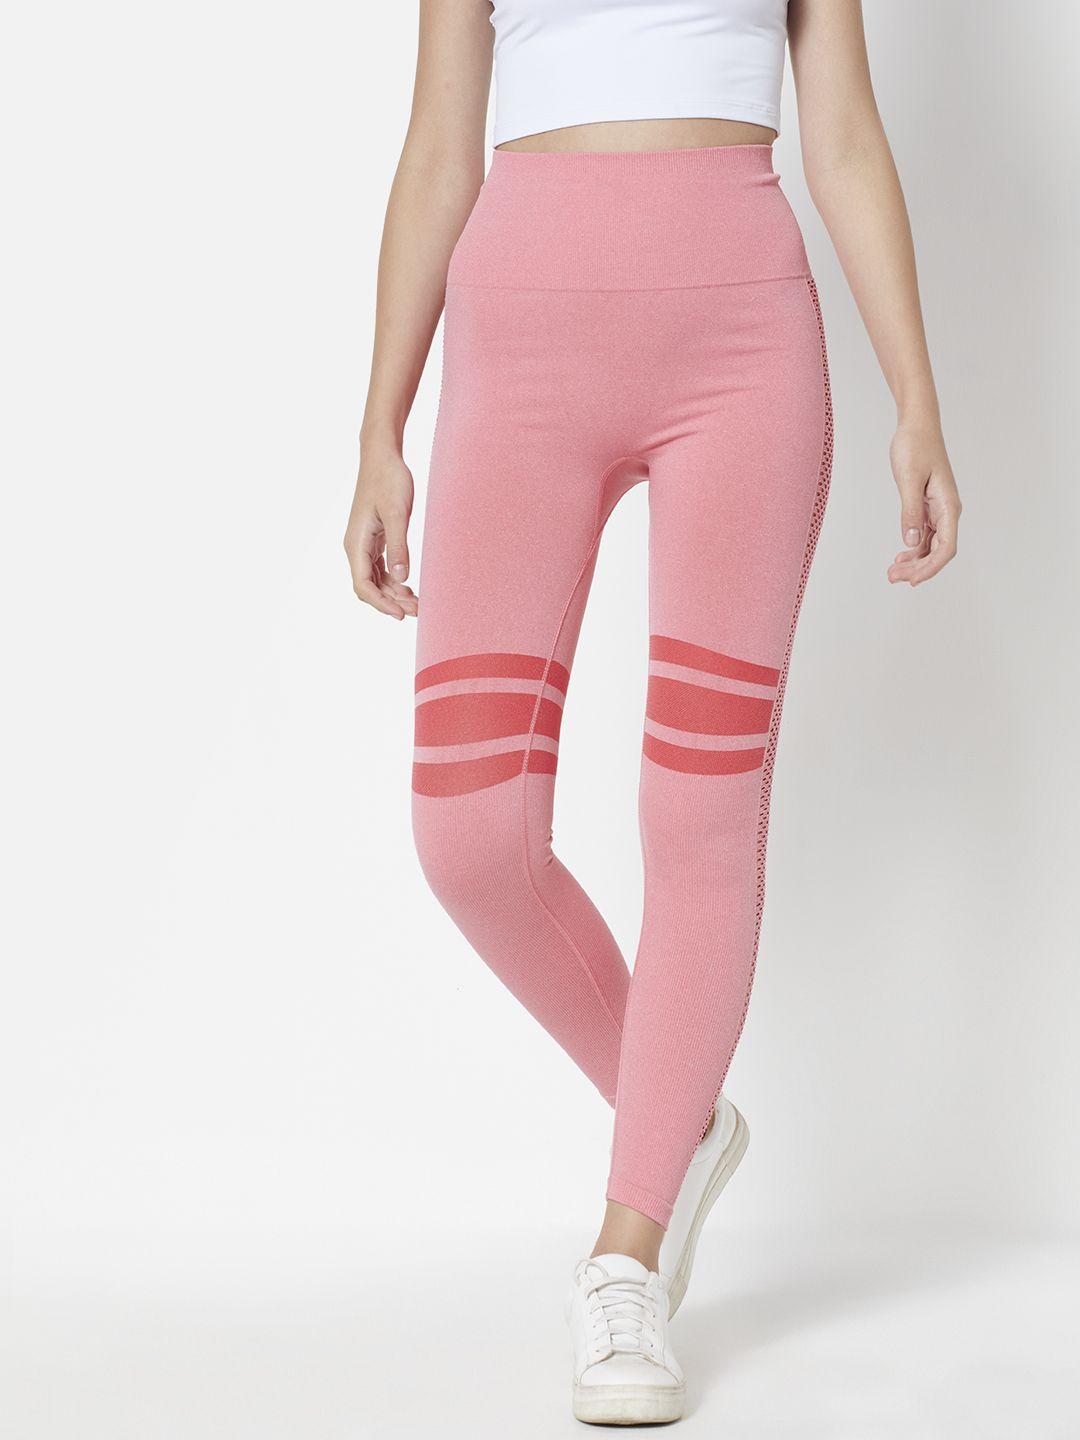 urbanic-women-pink-striped-cut-out-slim-fit-gym-tights